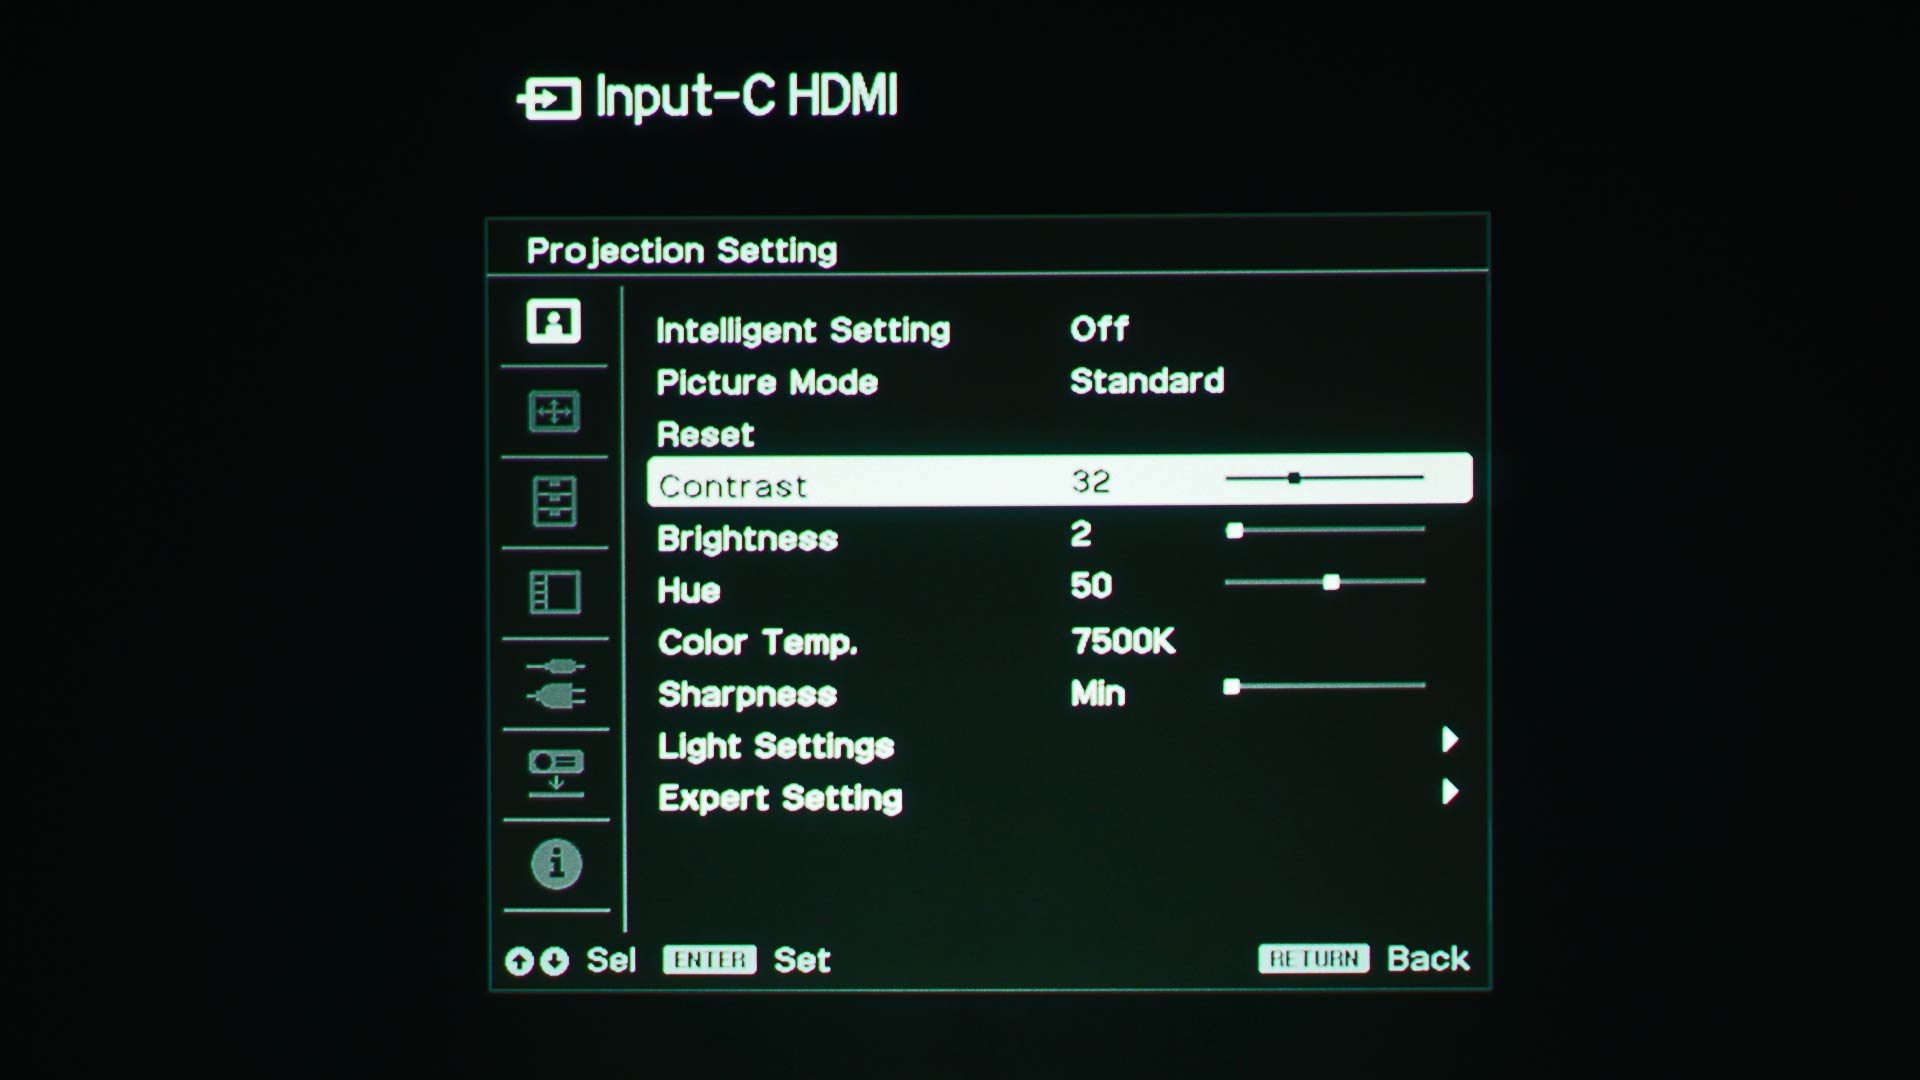 Sony Uses A Common Menu System - Projector Reviews - Image